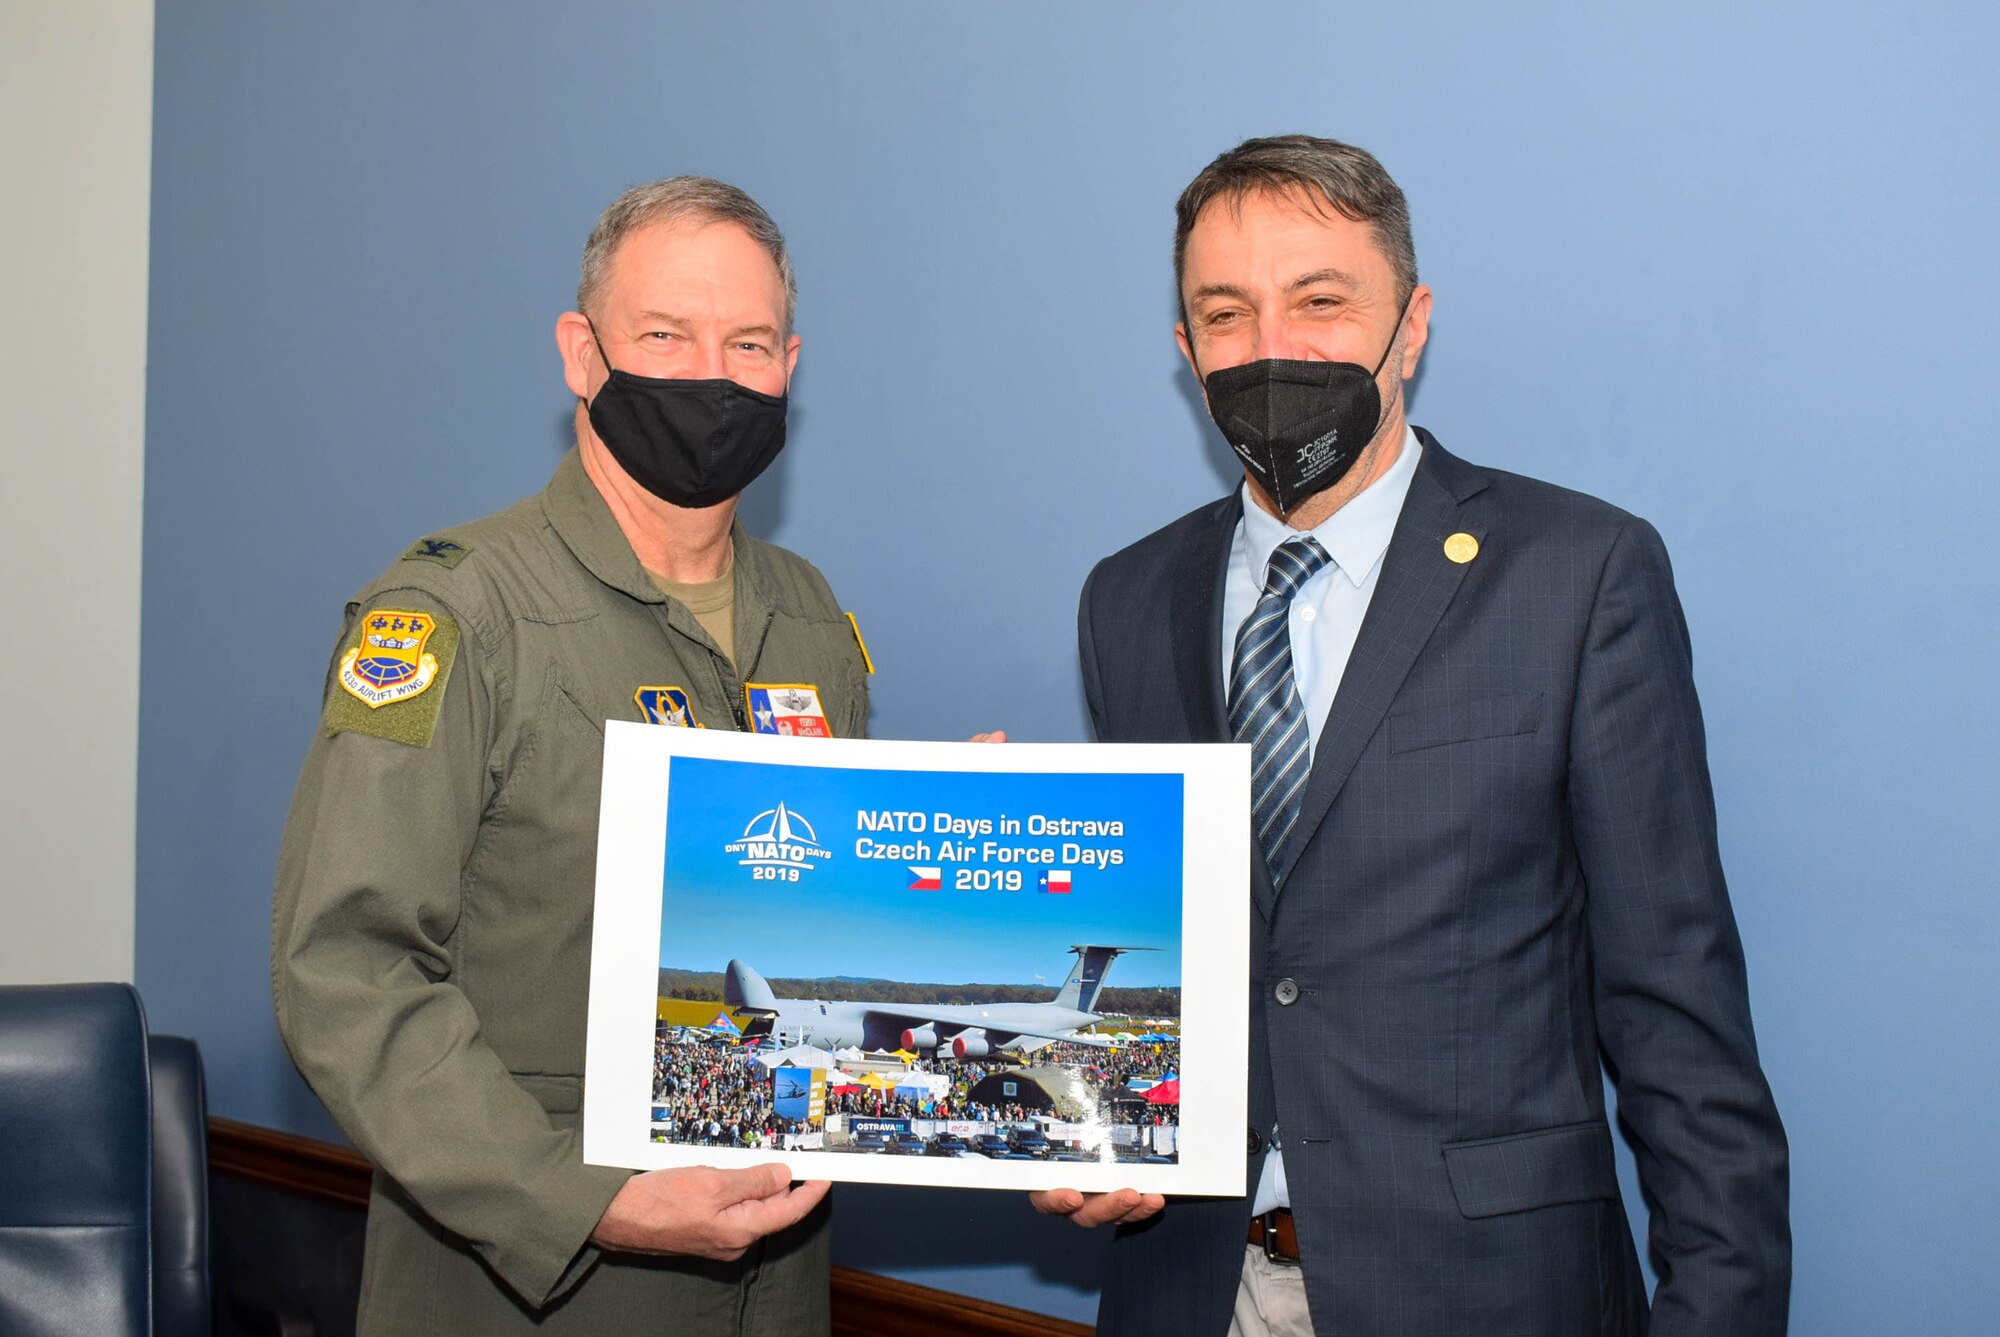 Col. Terry McClain, 433rd Airlift Wing commander, and Zbyněk Pavlačík, CEO and co-founder of Jagello 2000 Association, hold a photograph Jan. 25, 2022, of the wing’s C-5M Super Galaxy aircraft being showcased in 2019 in the Czech Republic, at Joint Base San Antonio-Lackland, Texas. (U.S. Air Force photo by Airman Mark Colmenares)